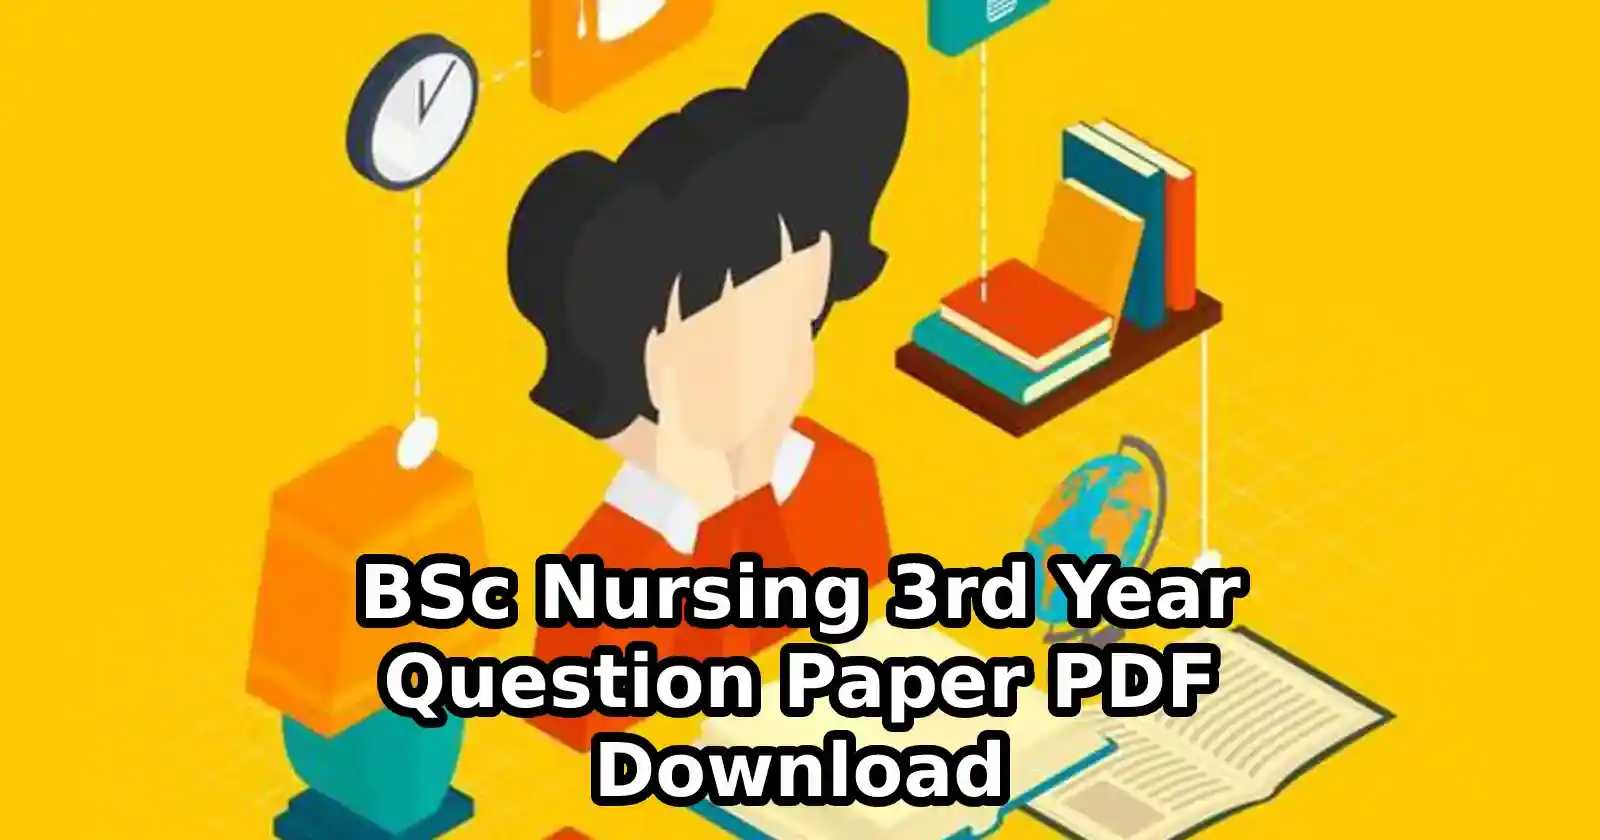 BSc Nursing 3rd Year Question Paper